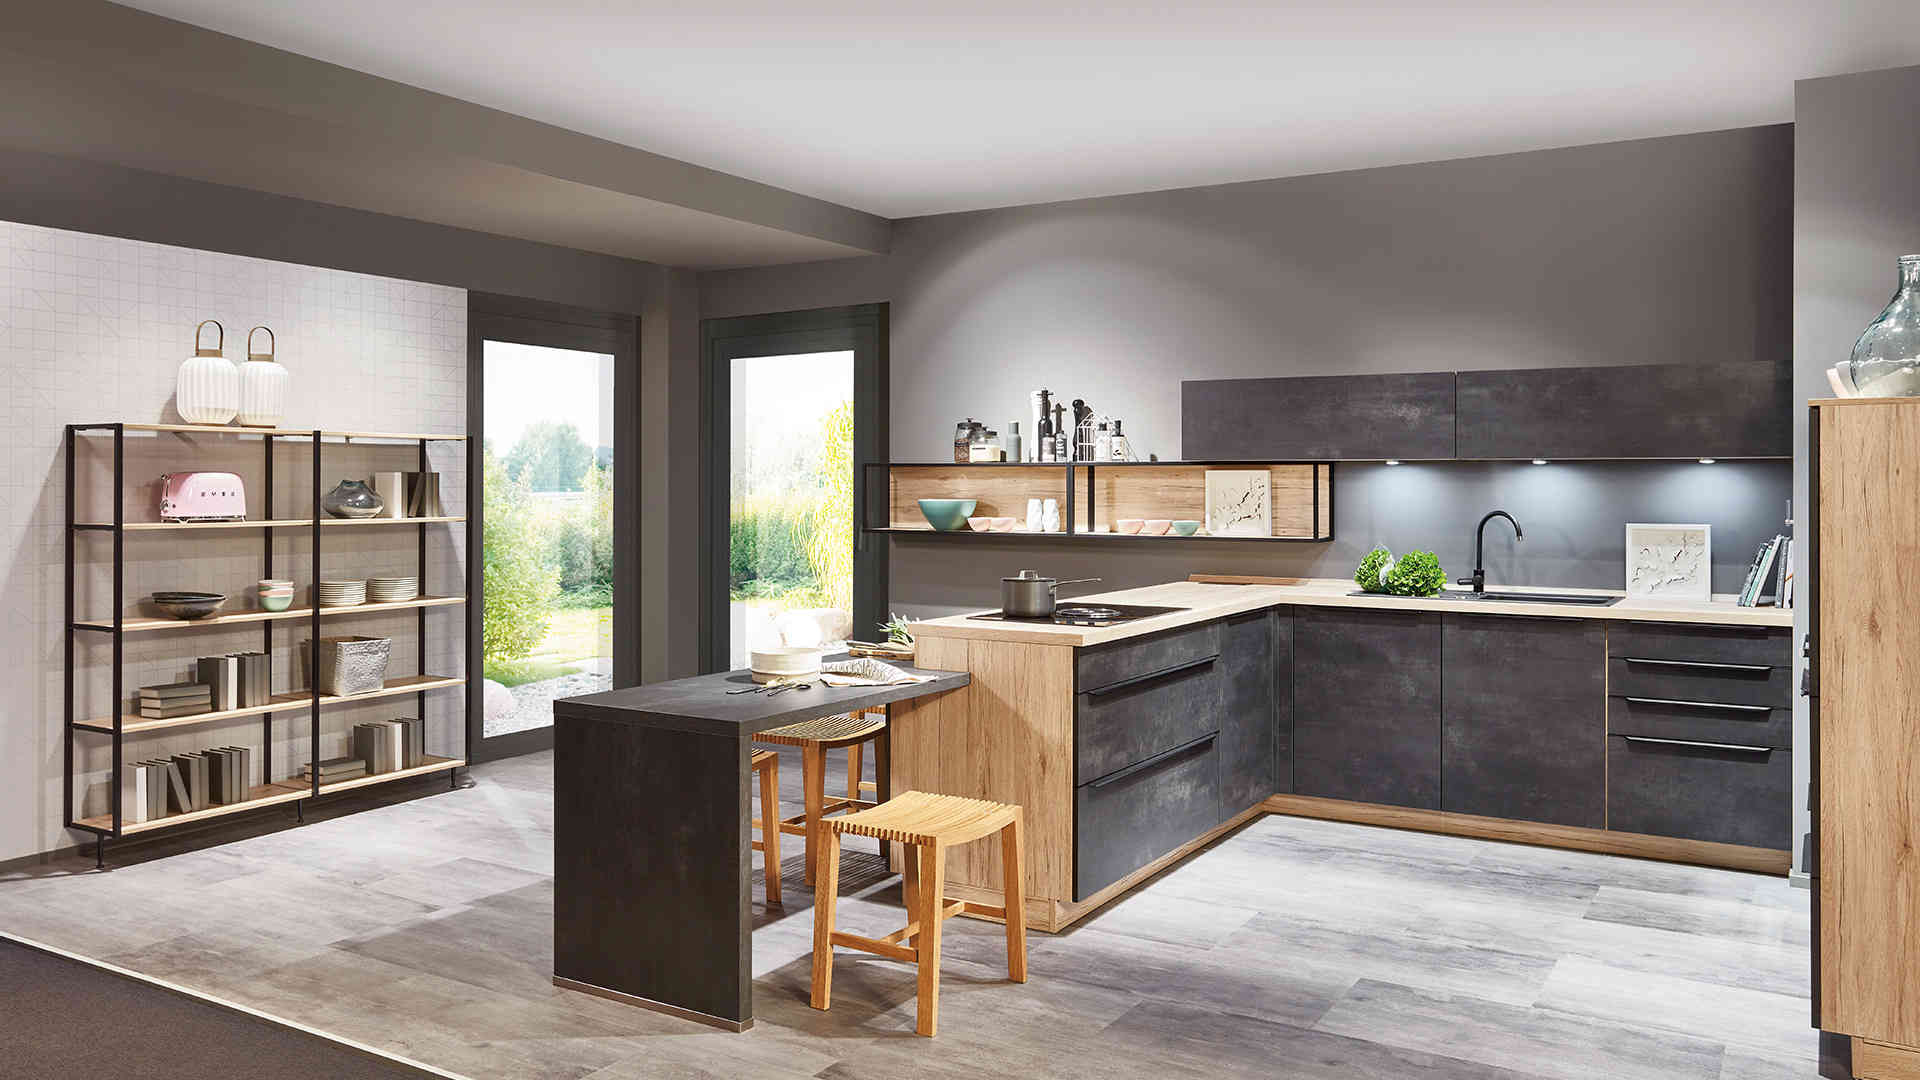 Black Matte And White L-Shaped Kitchen Design With Wooden Storage Units